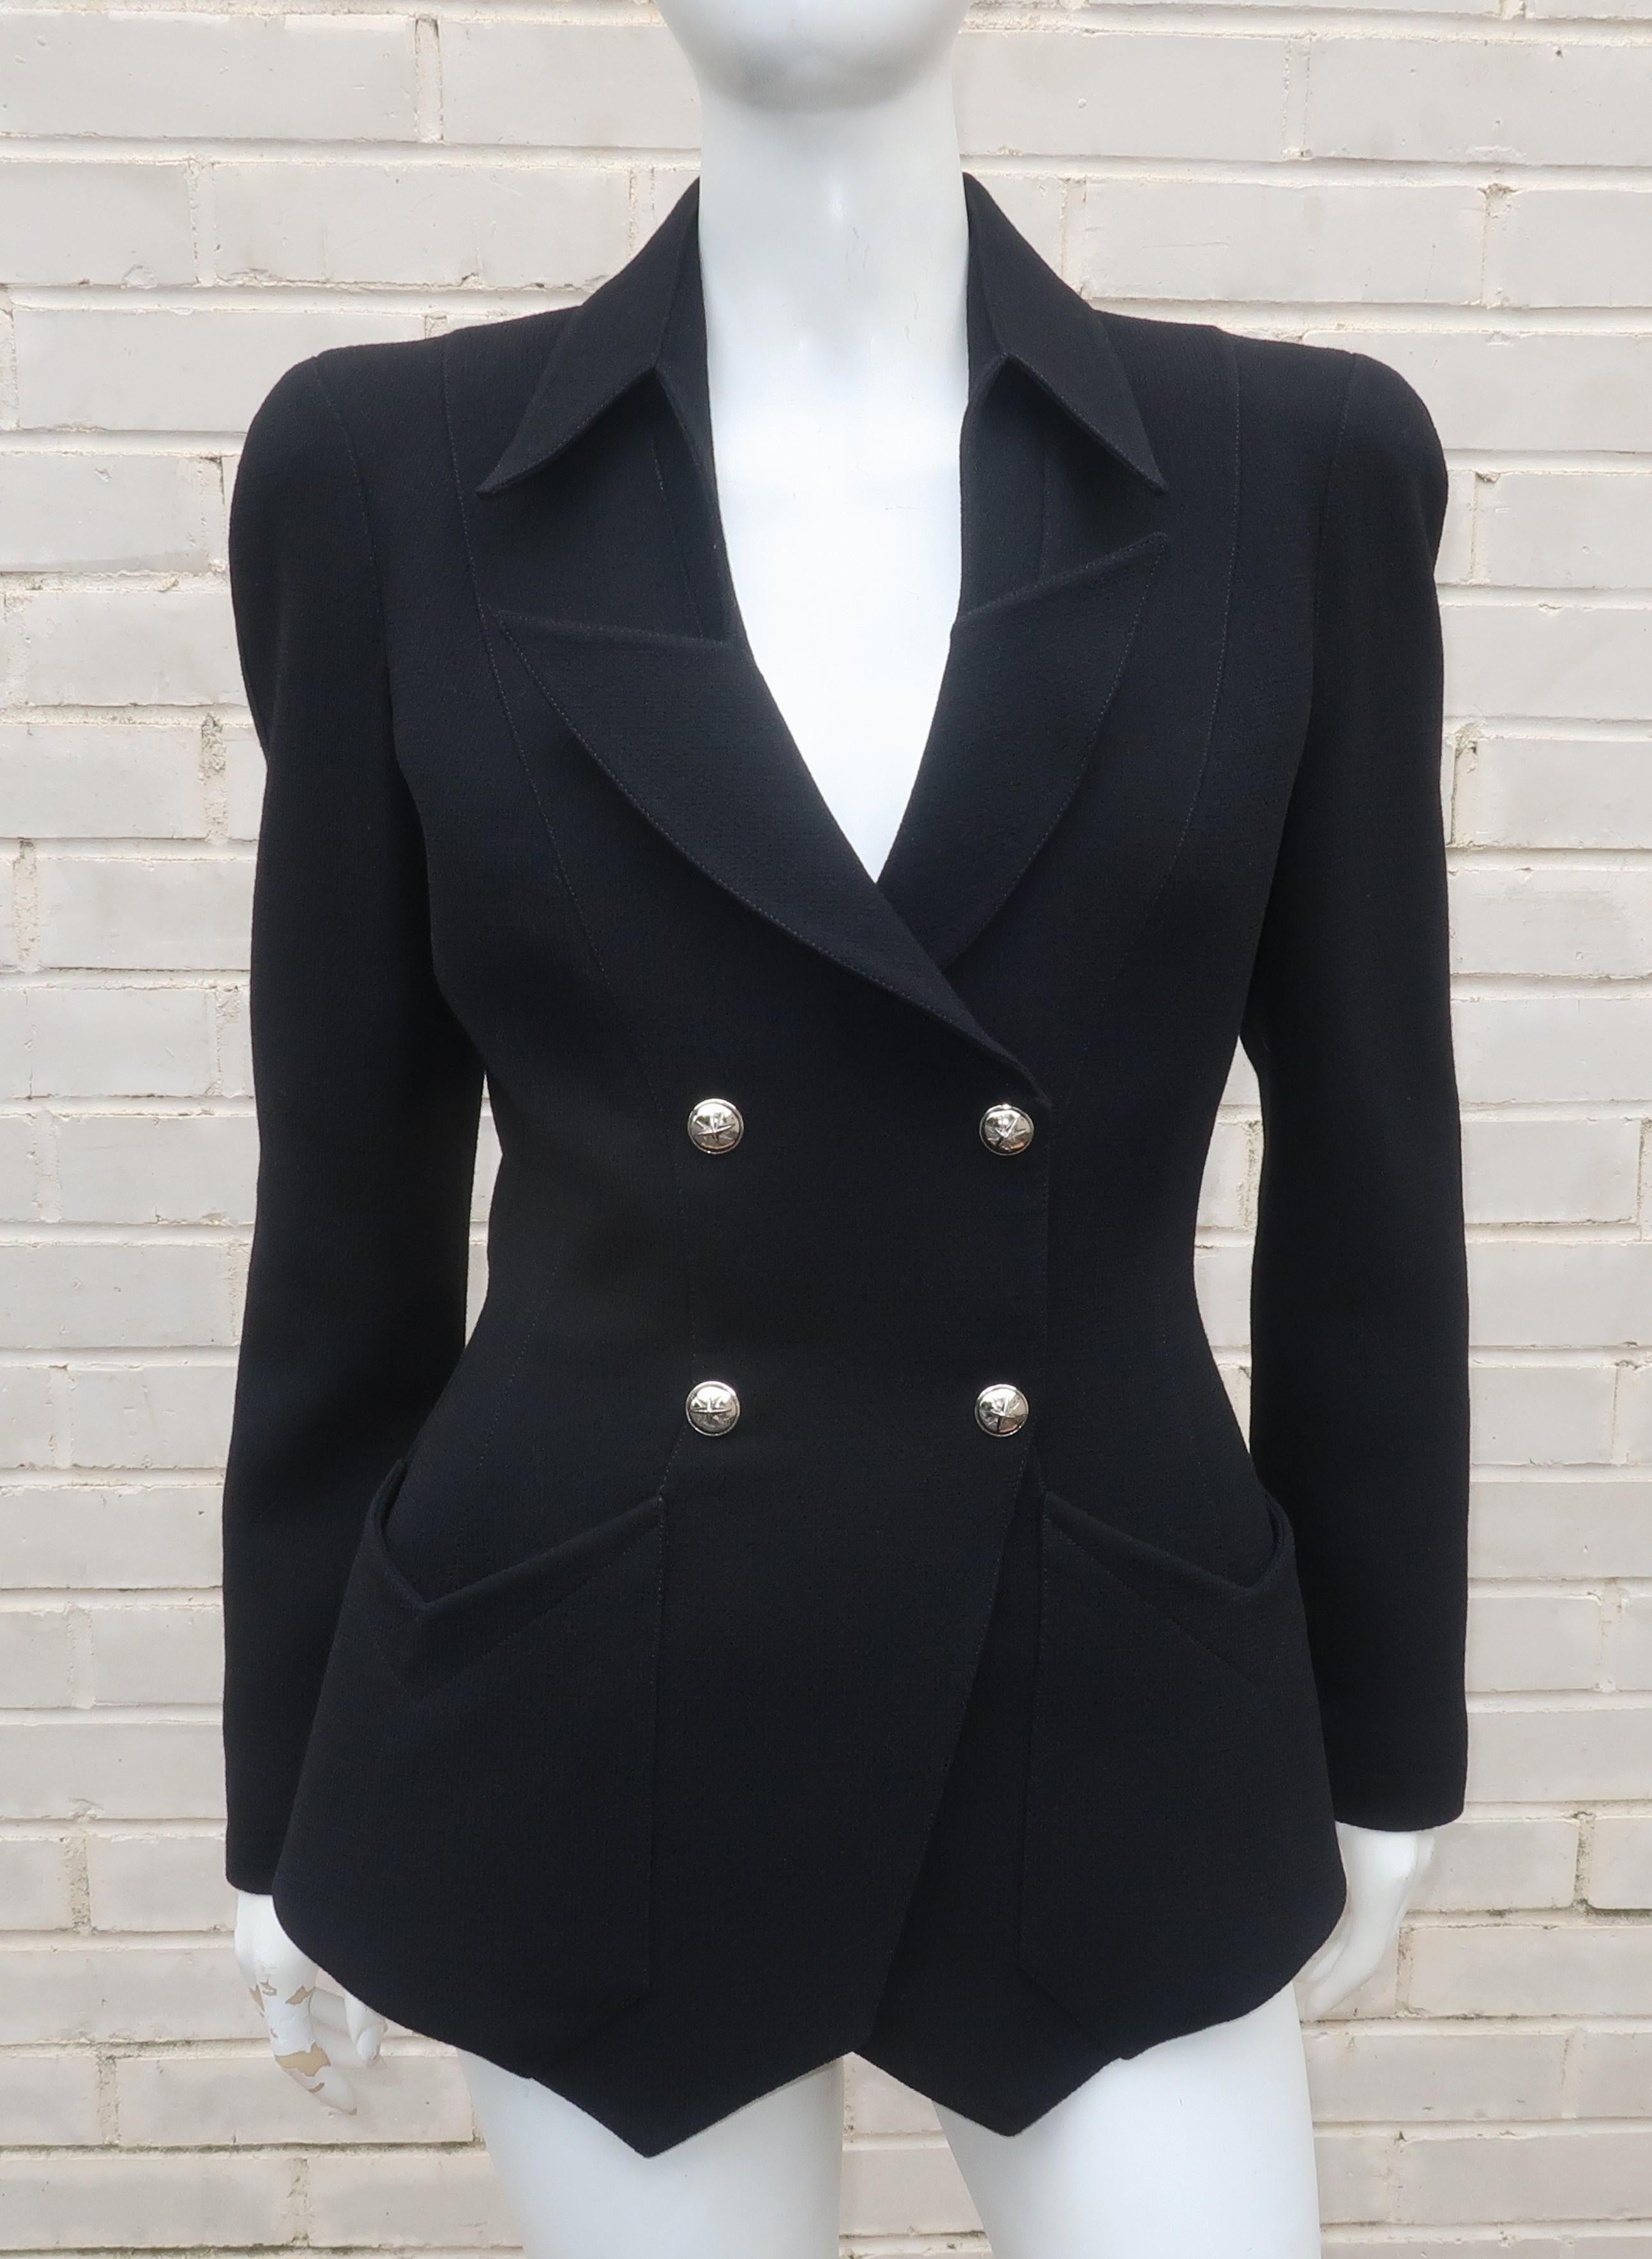 Thierry Mugler Black Skirt Suit With Star Buttons 4